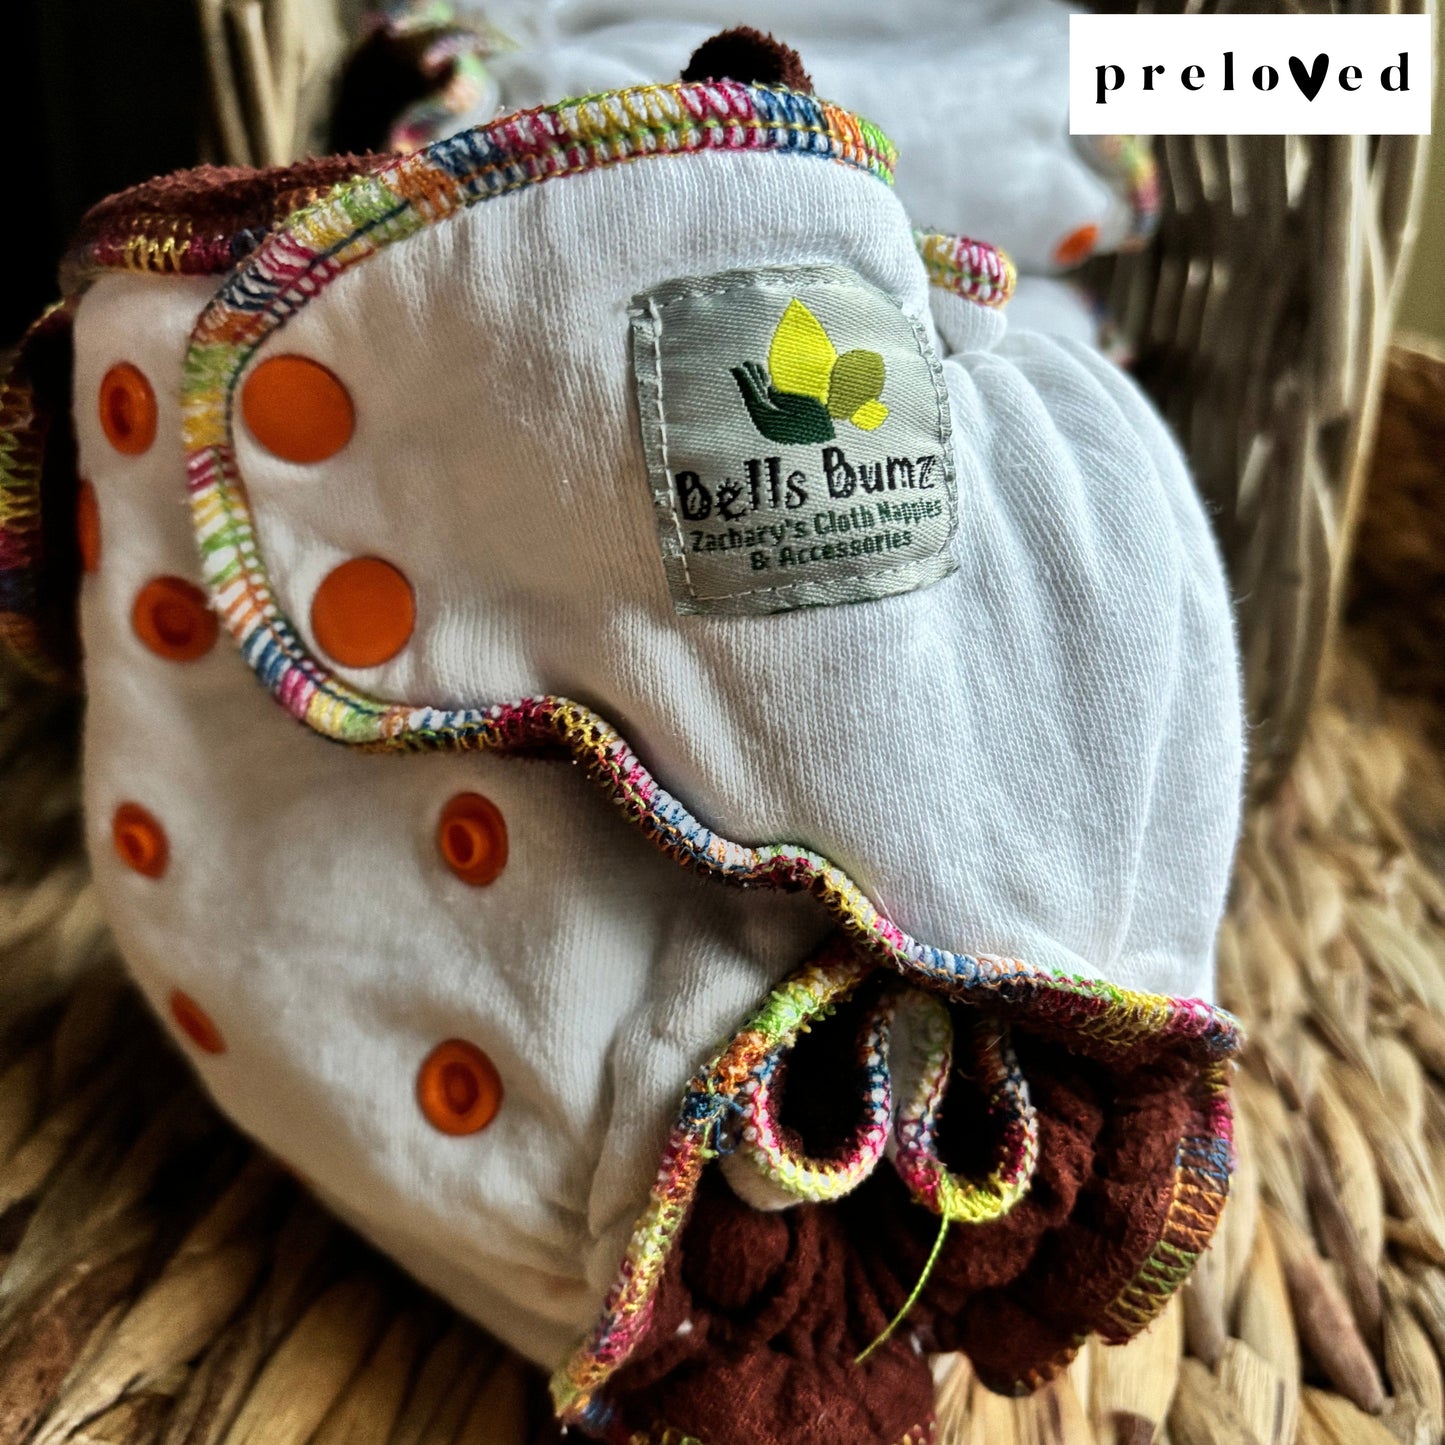 Bells Bumz BTP Hemp Fitted Nappy-Fitted Nappy-Bells Bumz-The Nappy Market